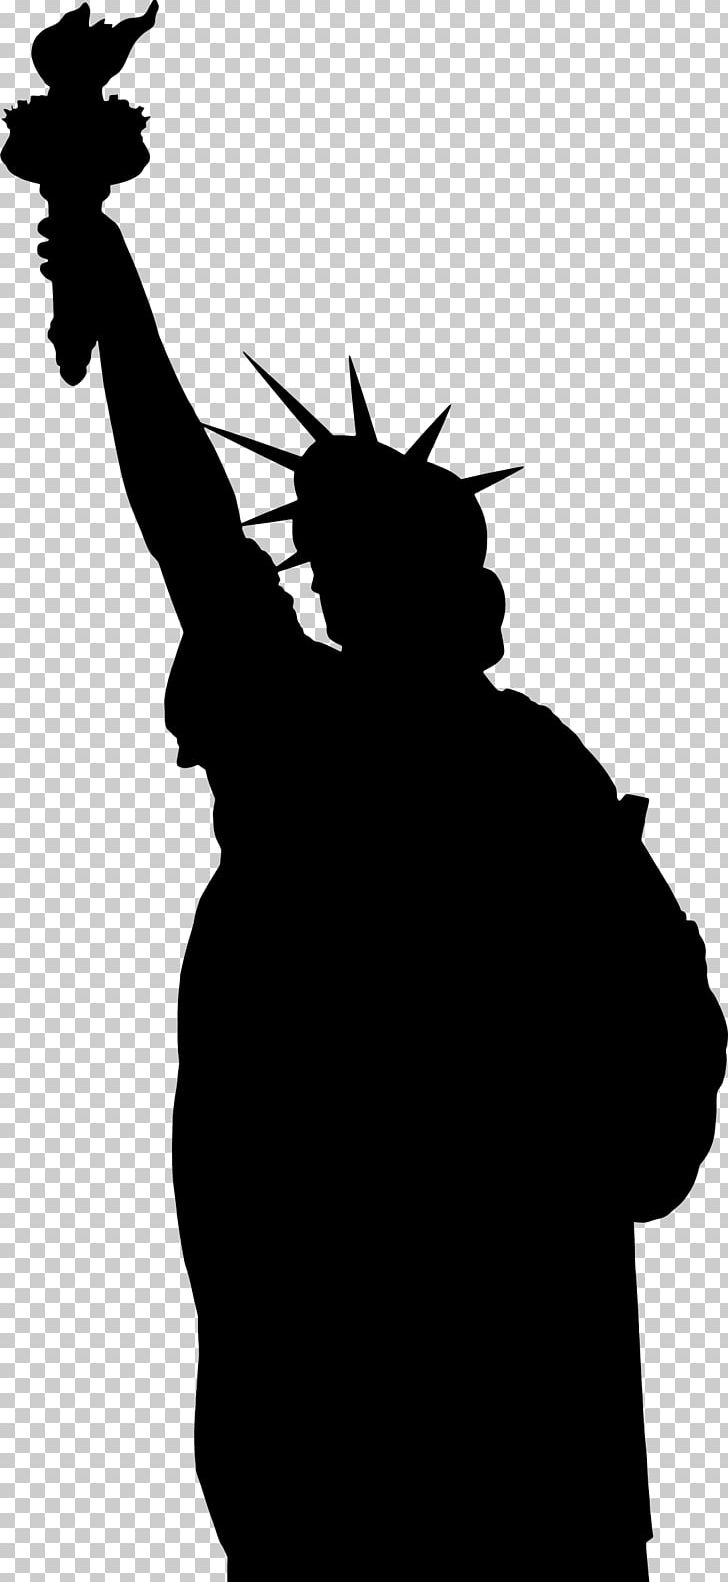 Statue Of Liberty Silhouette PNG, Clipart, Art, Black And White, Fictional Character, Liberty Island, Monochrome Free PNG Download